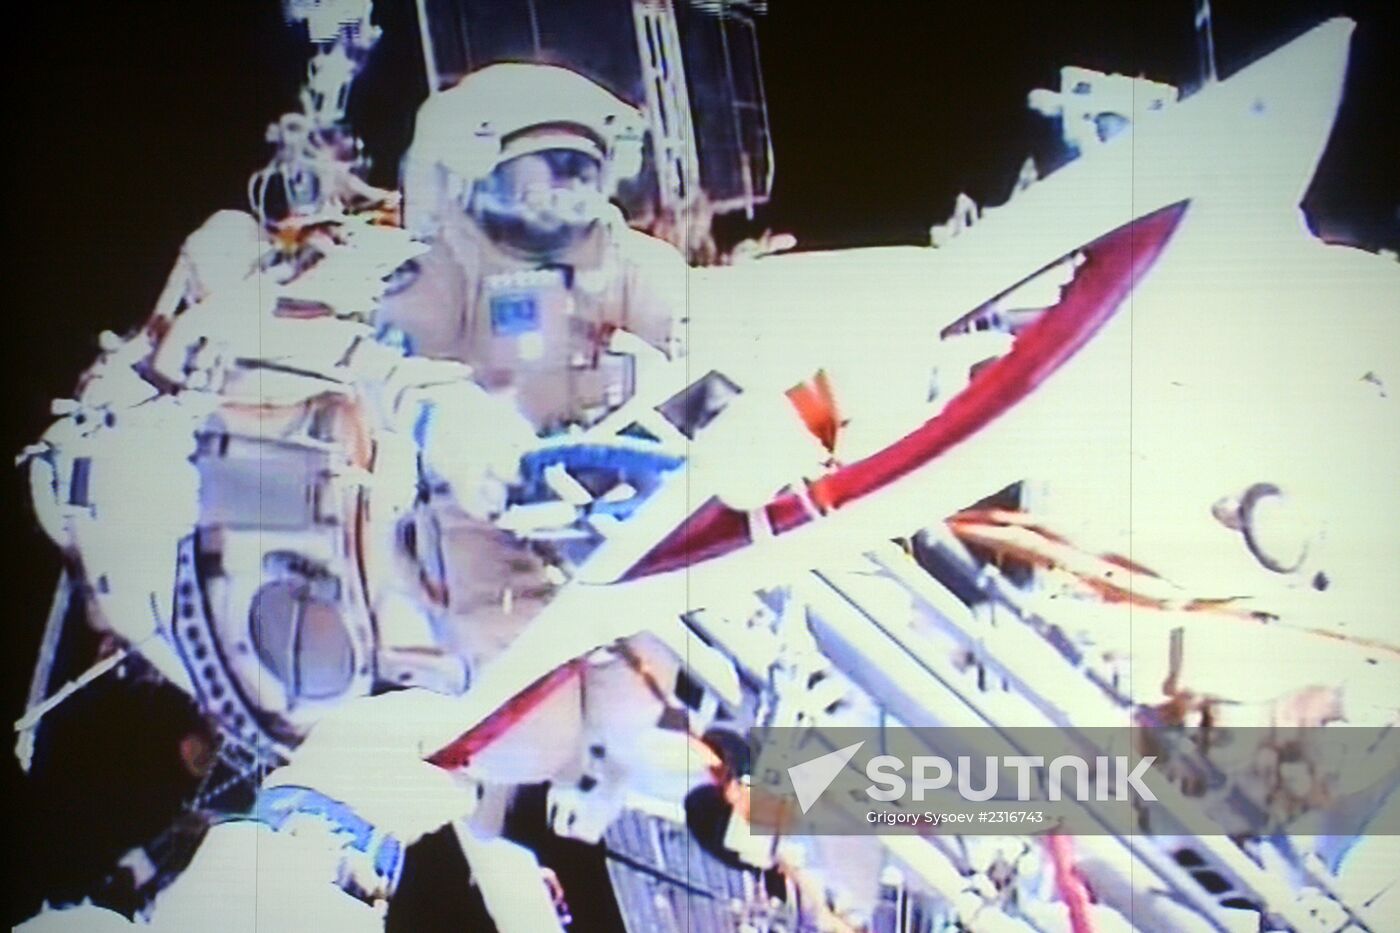 Olympic torch carried into space - live broadcast